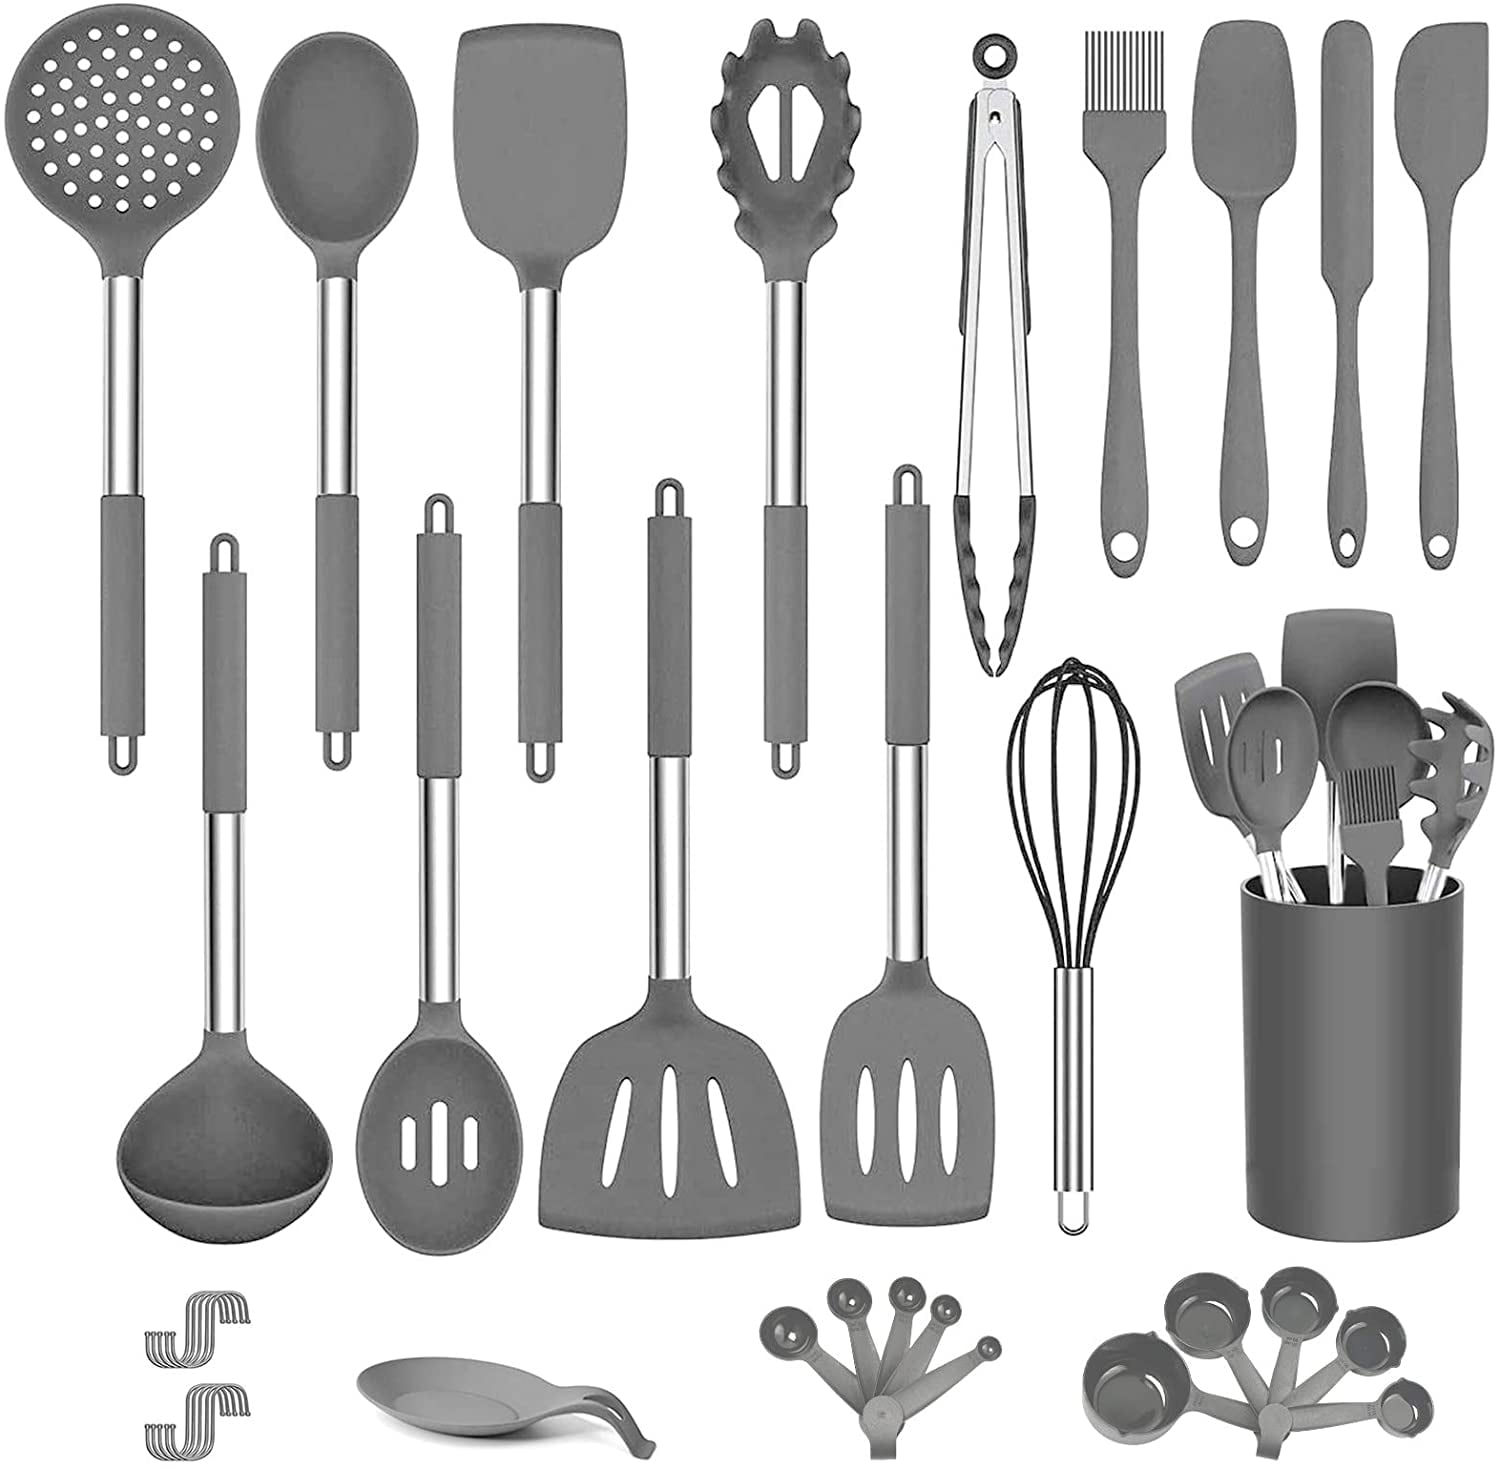 Kitchen Utensil Set,36PCS Silicone Cooking Utensils with Holder,Heat-Resistant Non-Stick BPA-Free Stainless Steel Handle Silicone Spoons Spatula Turner Whisk Tongs Measuring Cups Cooking Tools Set 